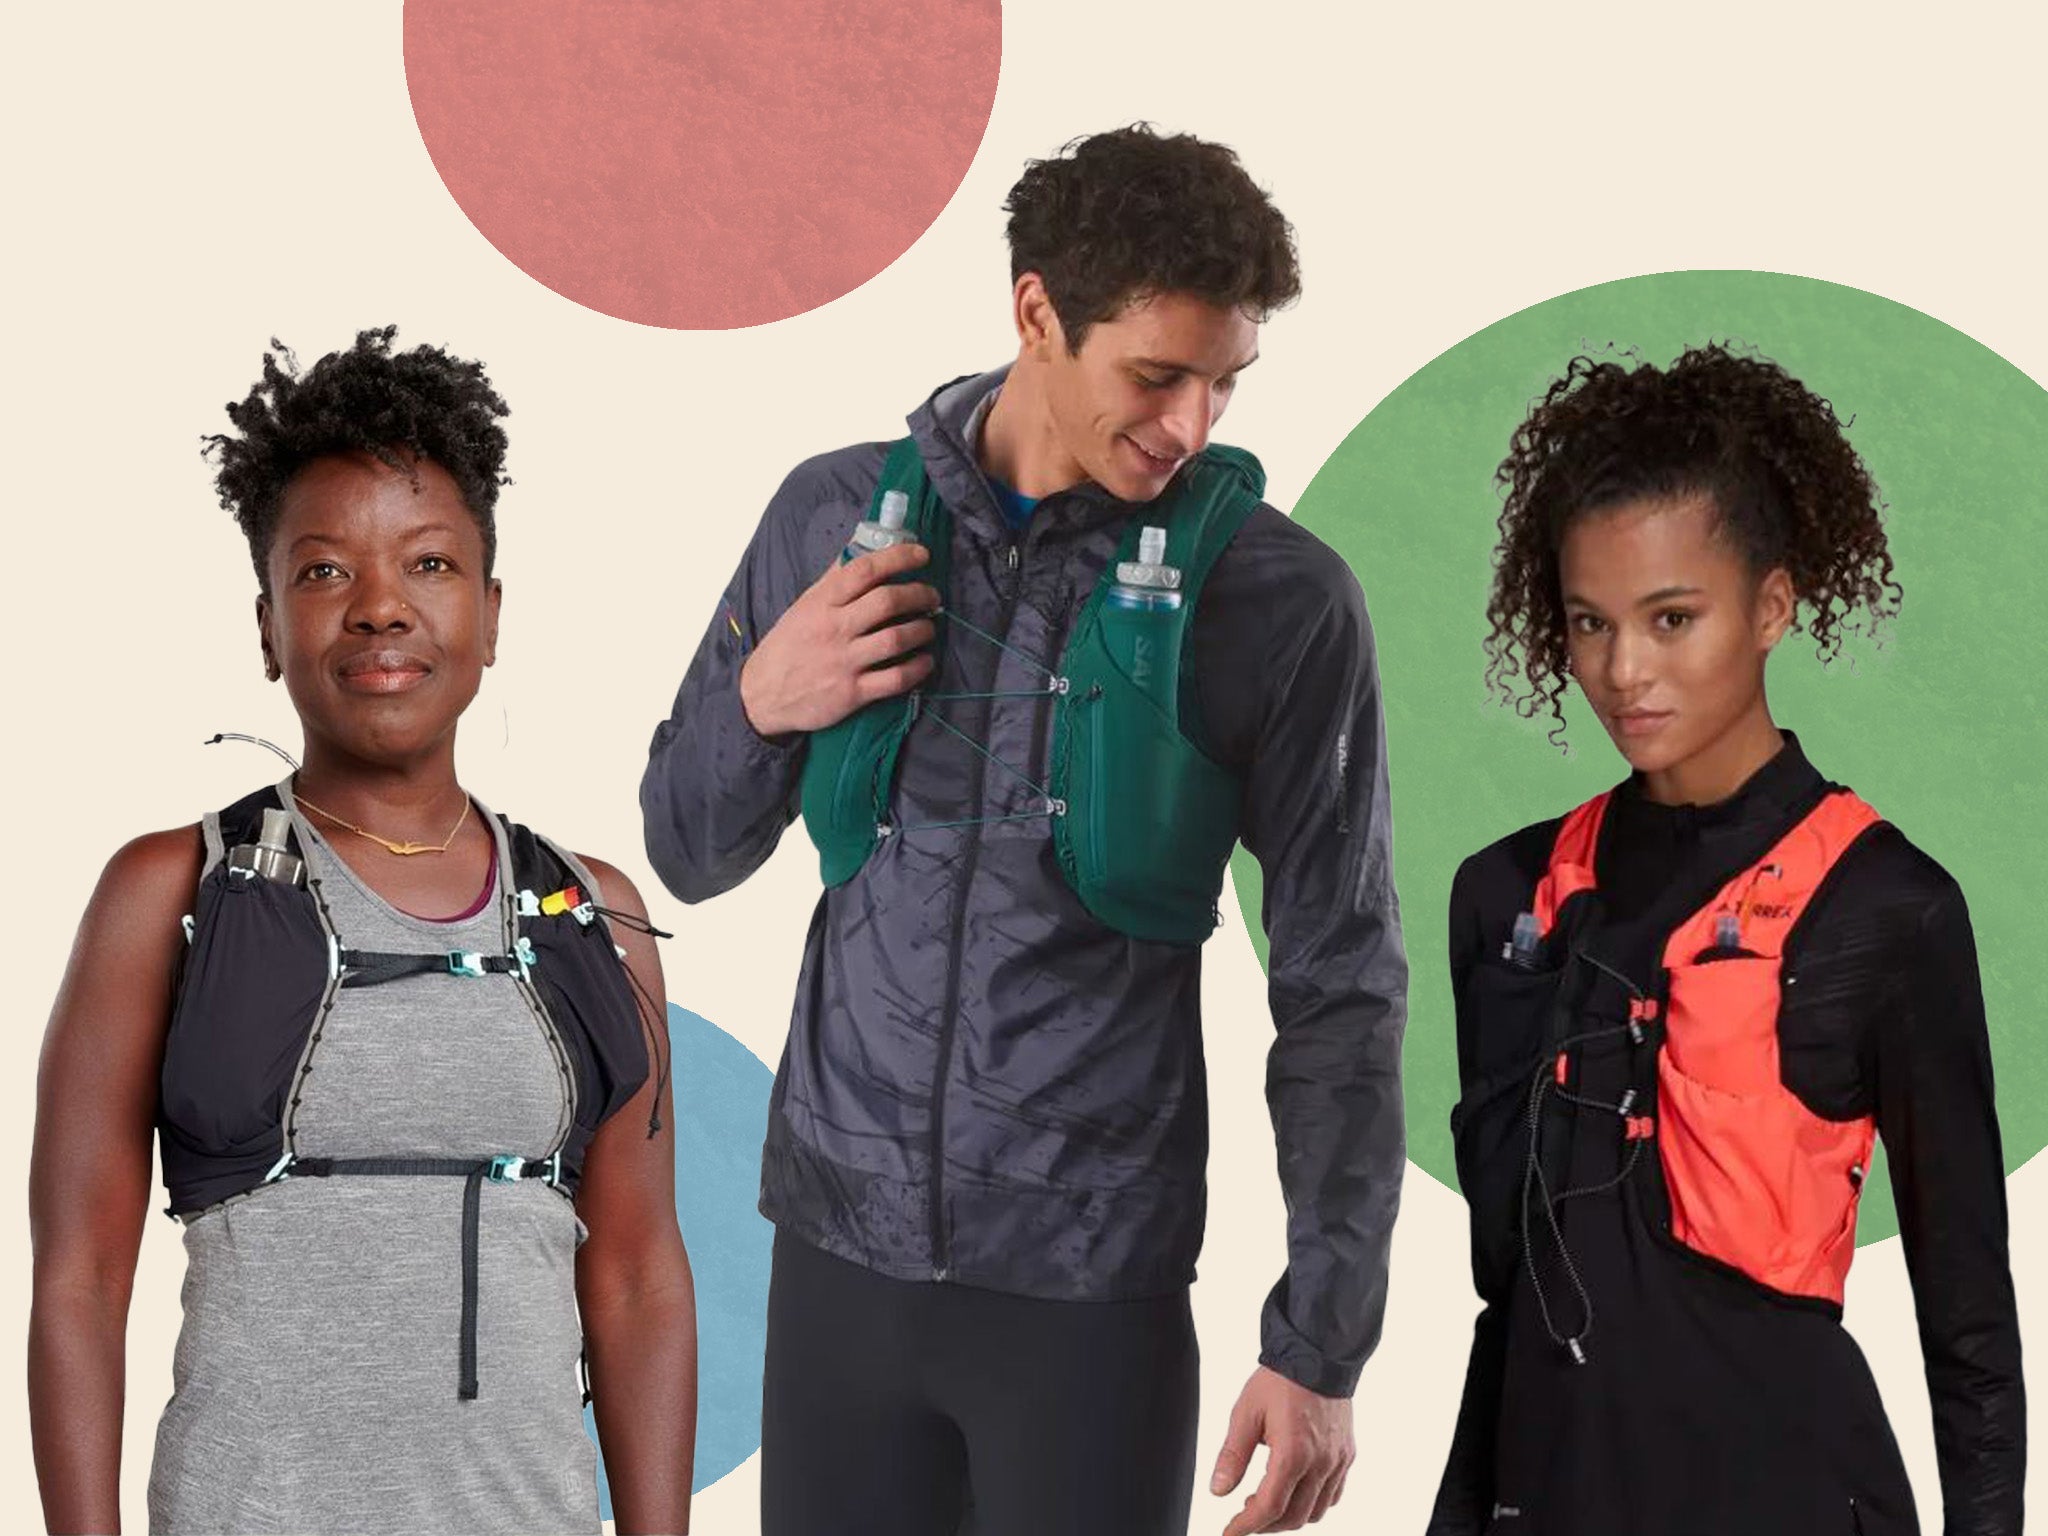 Running Vest: Beginners Guide To Trail Race Training - UltimateDirection